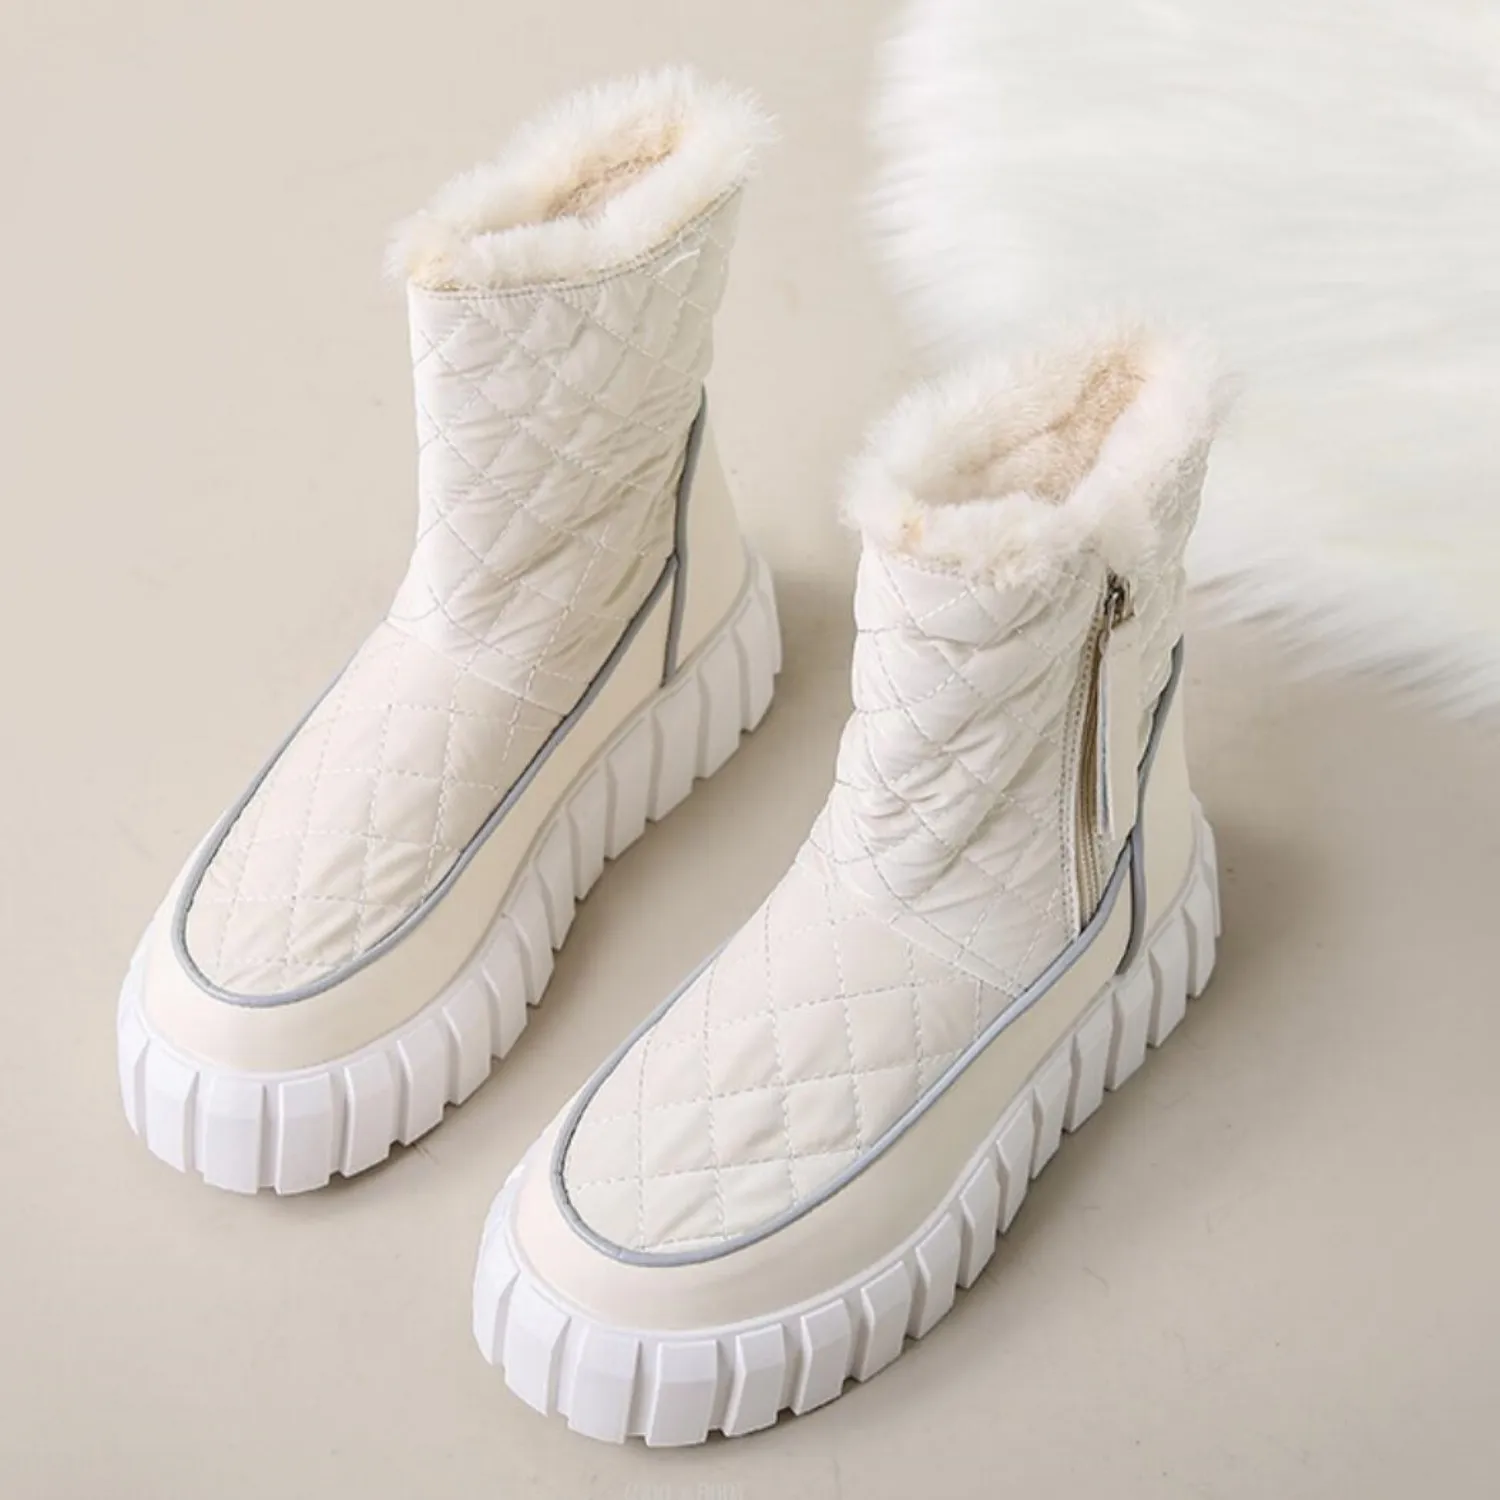 

Winter Women Snow Boots Warm Thick Plush Snow Boots Waterproof Fashion Wedge Platform Mid-Calf Boots Non-Slip Booties Botas Muje